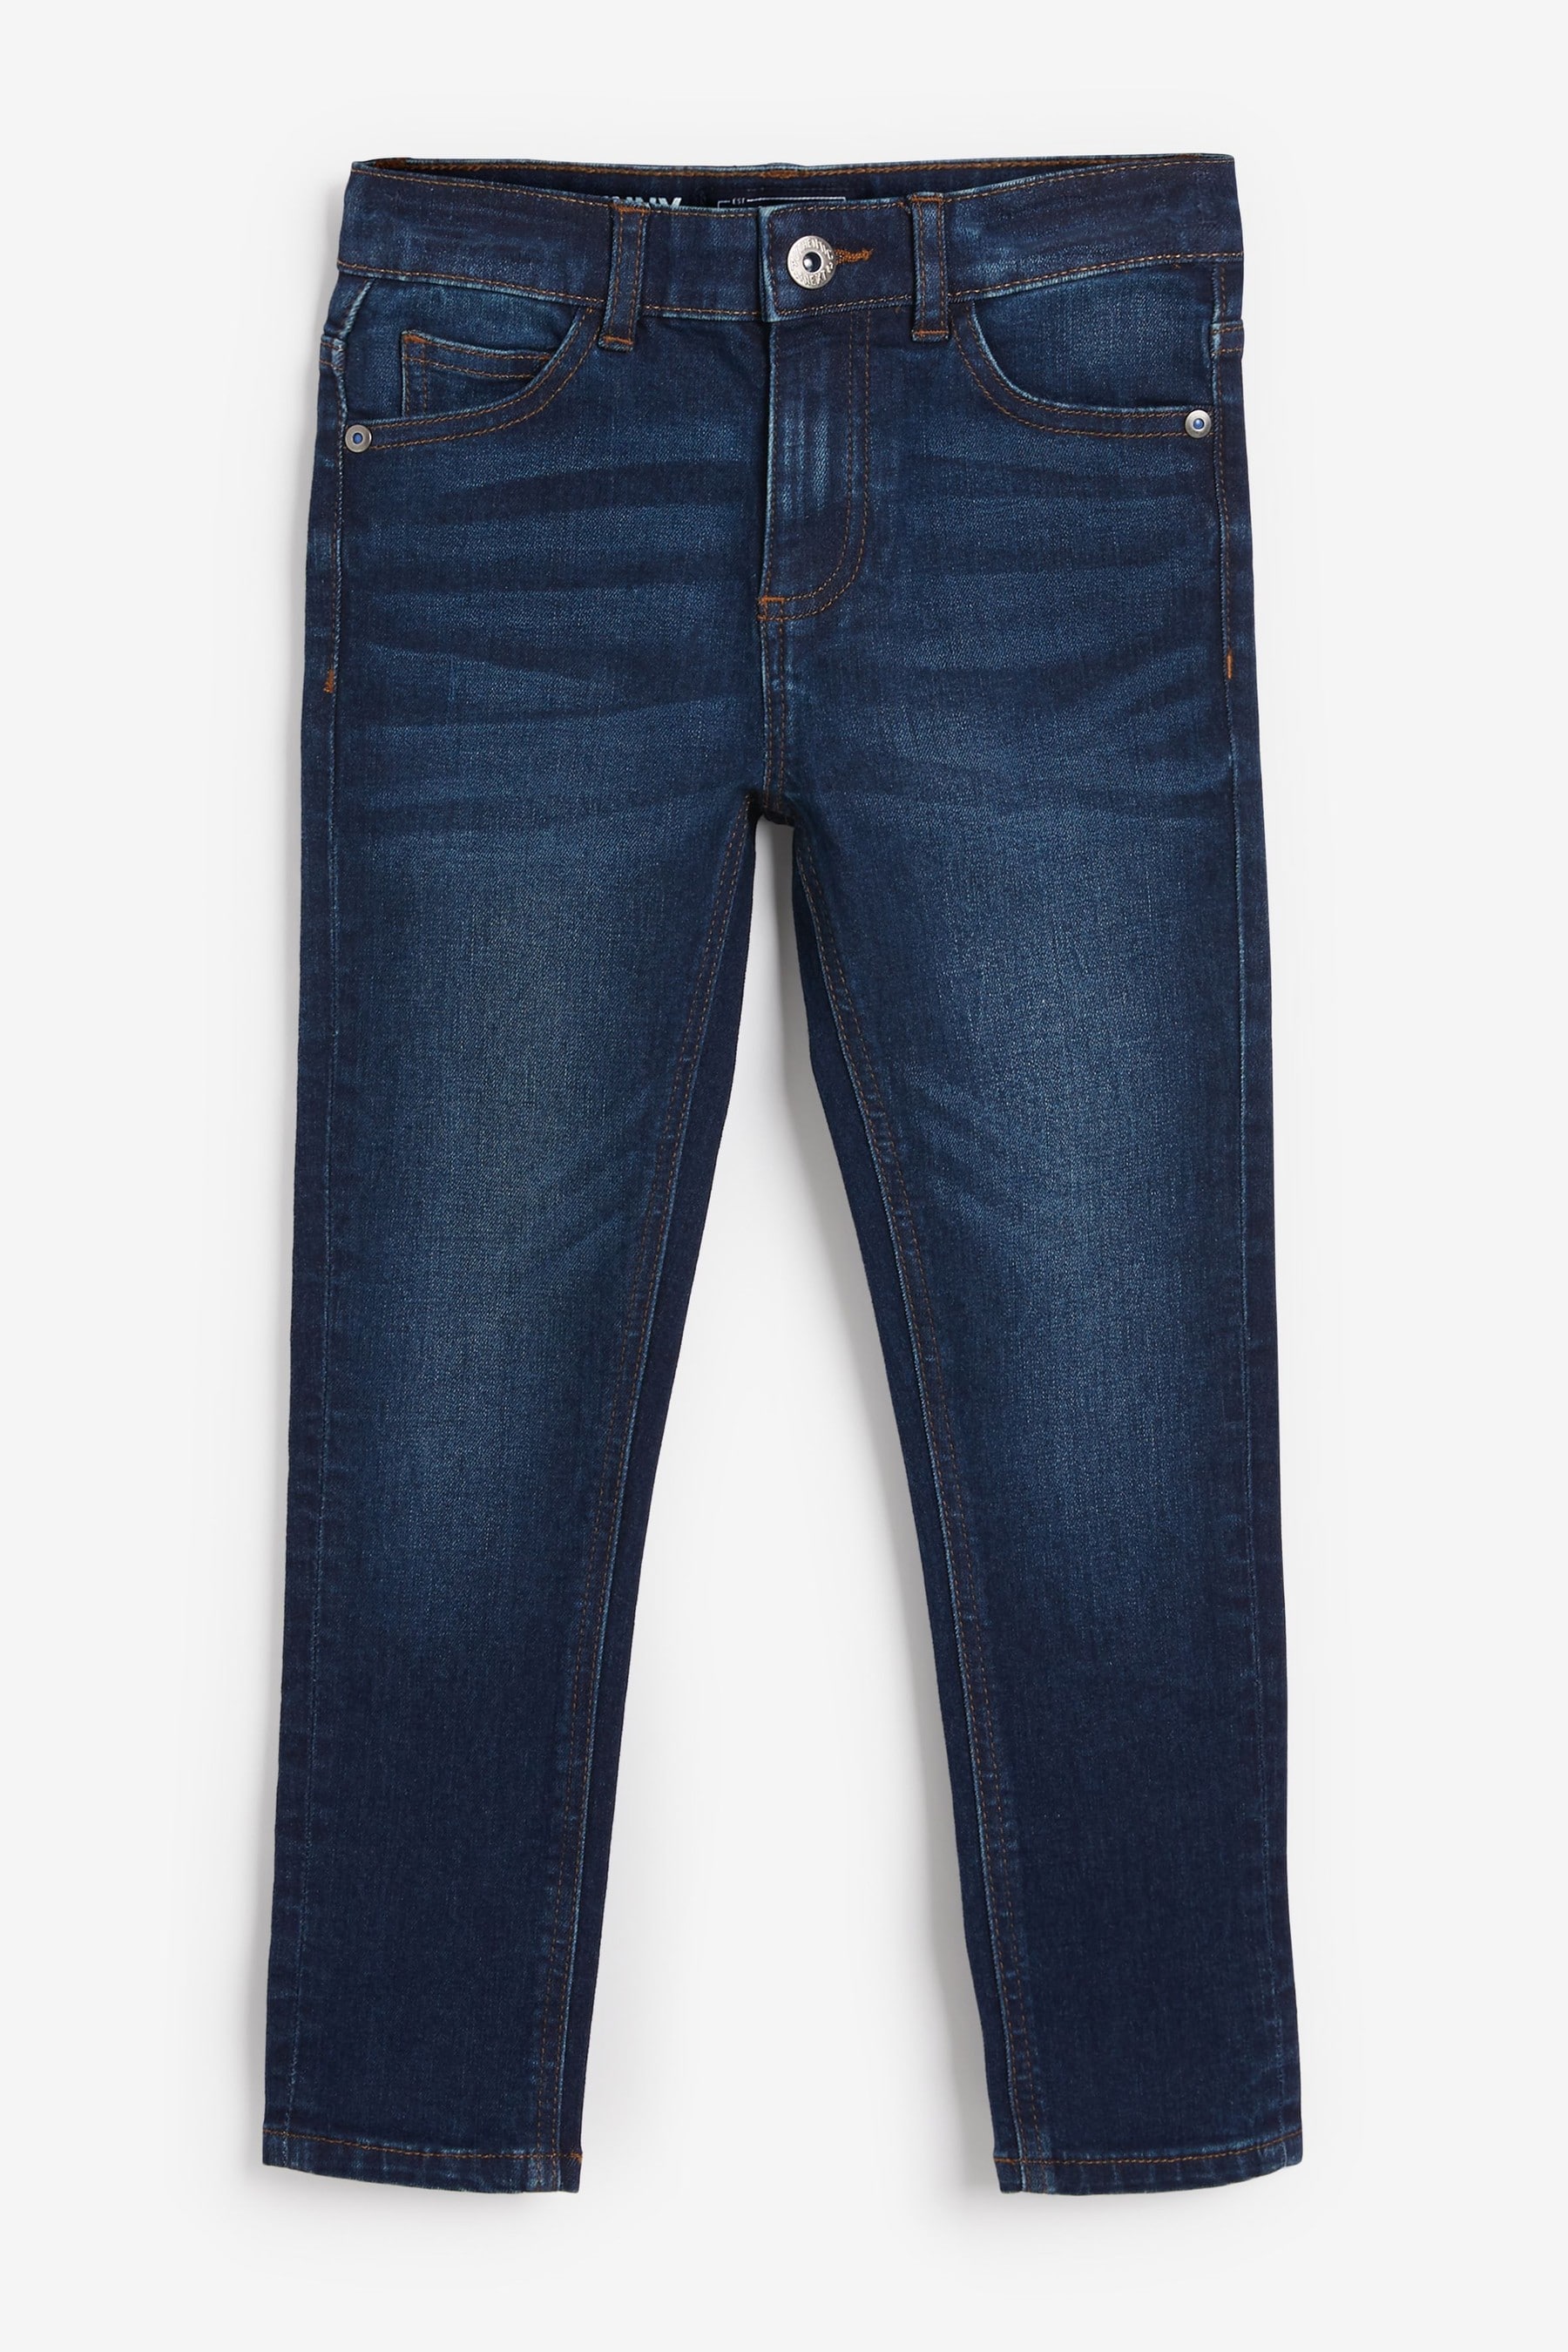 Buy Blue Indigo Skinny Fit Cotton Rich Stretch Jeans (3-17yrs) from the ...